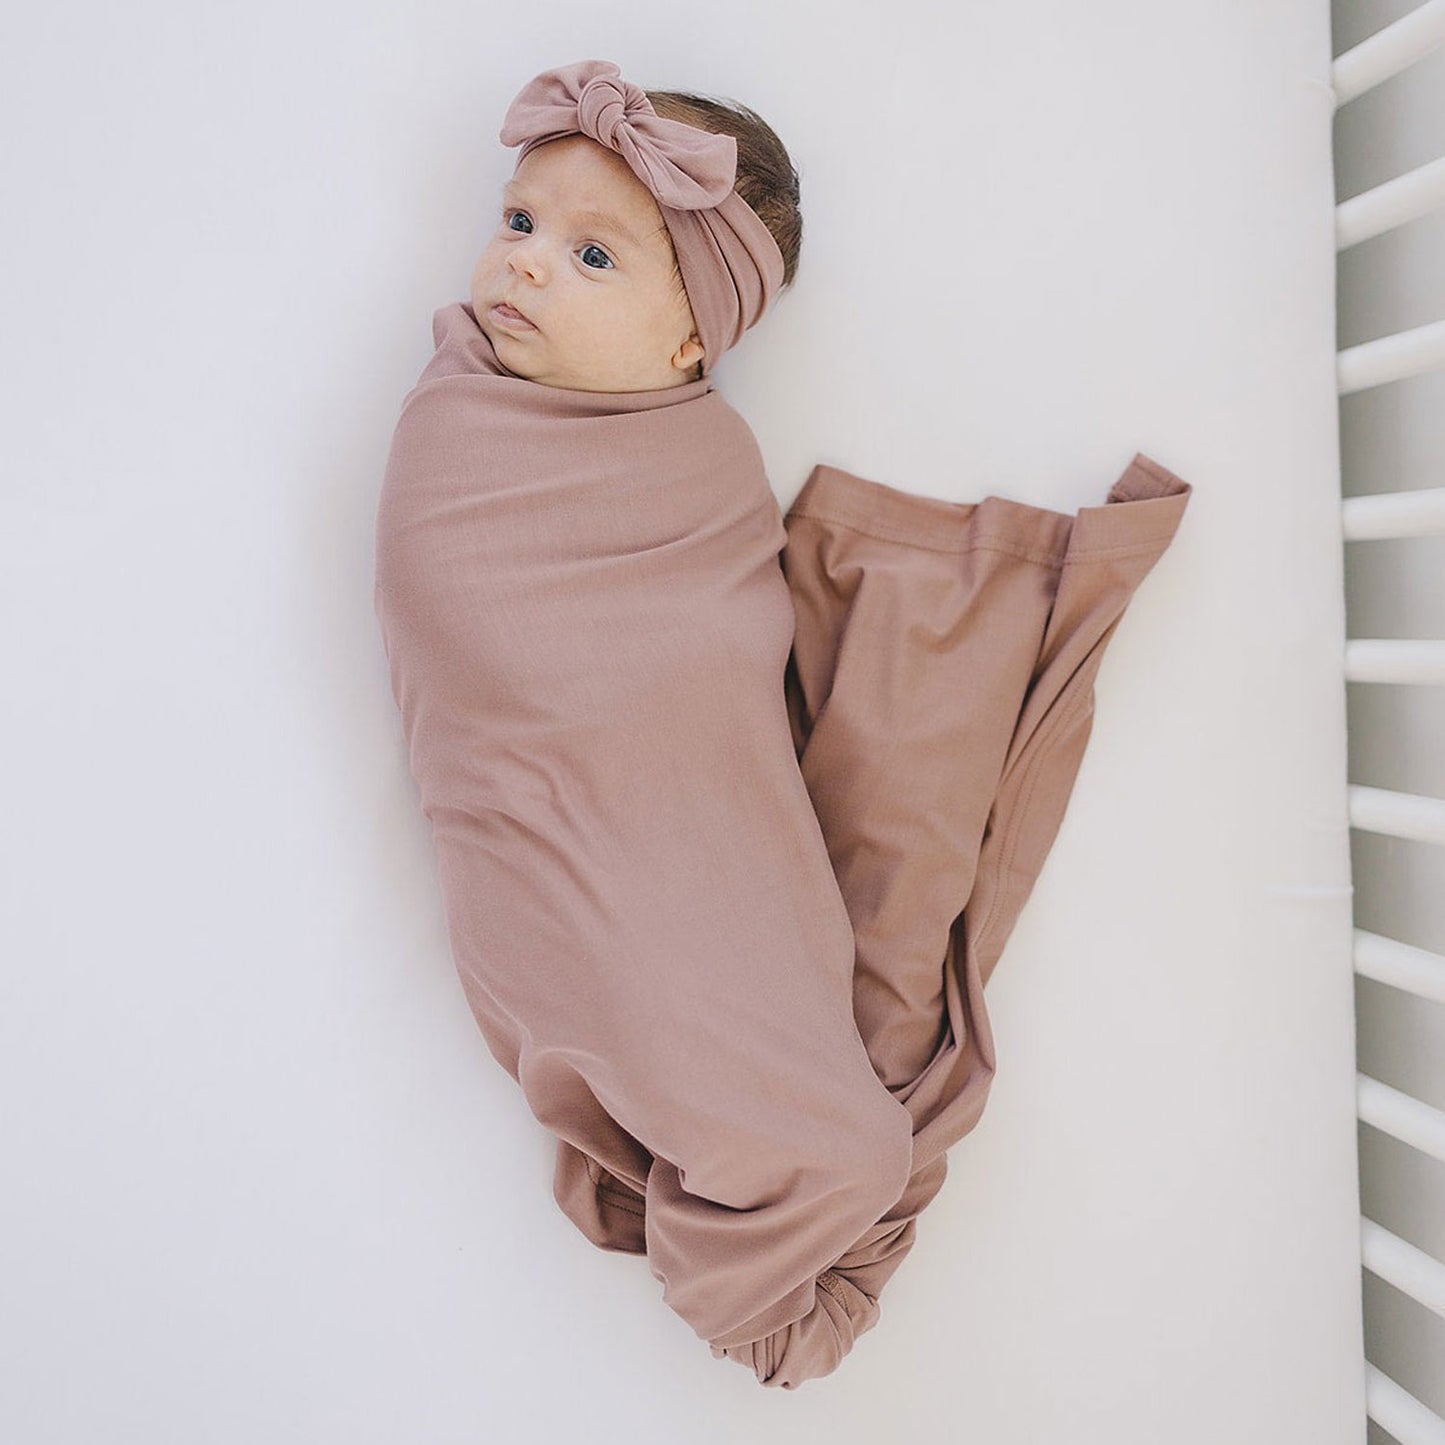 Baby swaddled in Mebie Baby Bamboo Stretch Swaddle Blanket - Dusty Rose